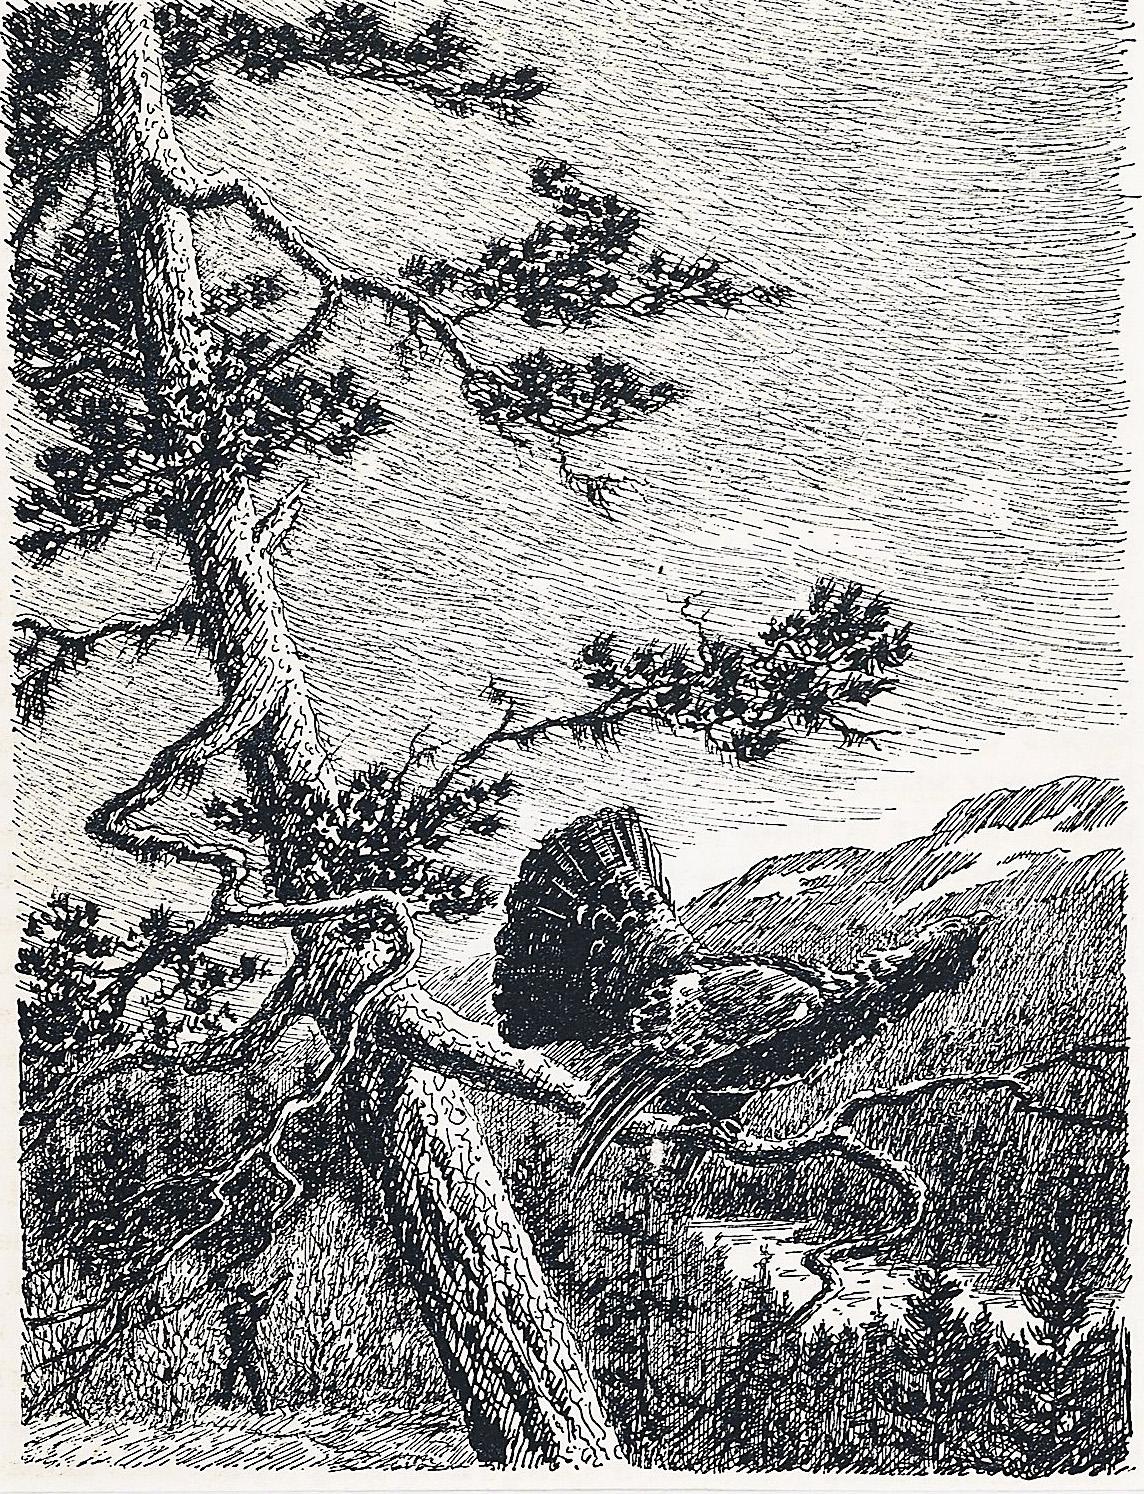 A pair of lithographs, one showing a lone fisherman casting his line in a perfect spot near a waterfall, and the other showing a wild turkey in a tree in a Scandinavian forest. Matted with acid-free, 1 3/4 inch coarse weave black linen mat. Framed